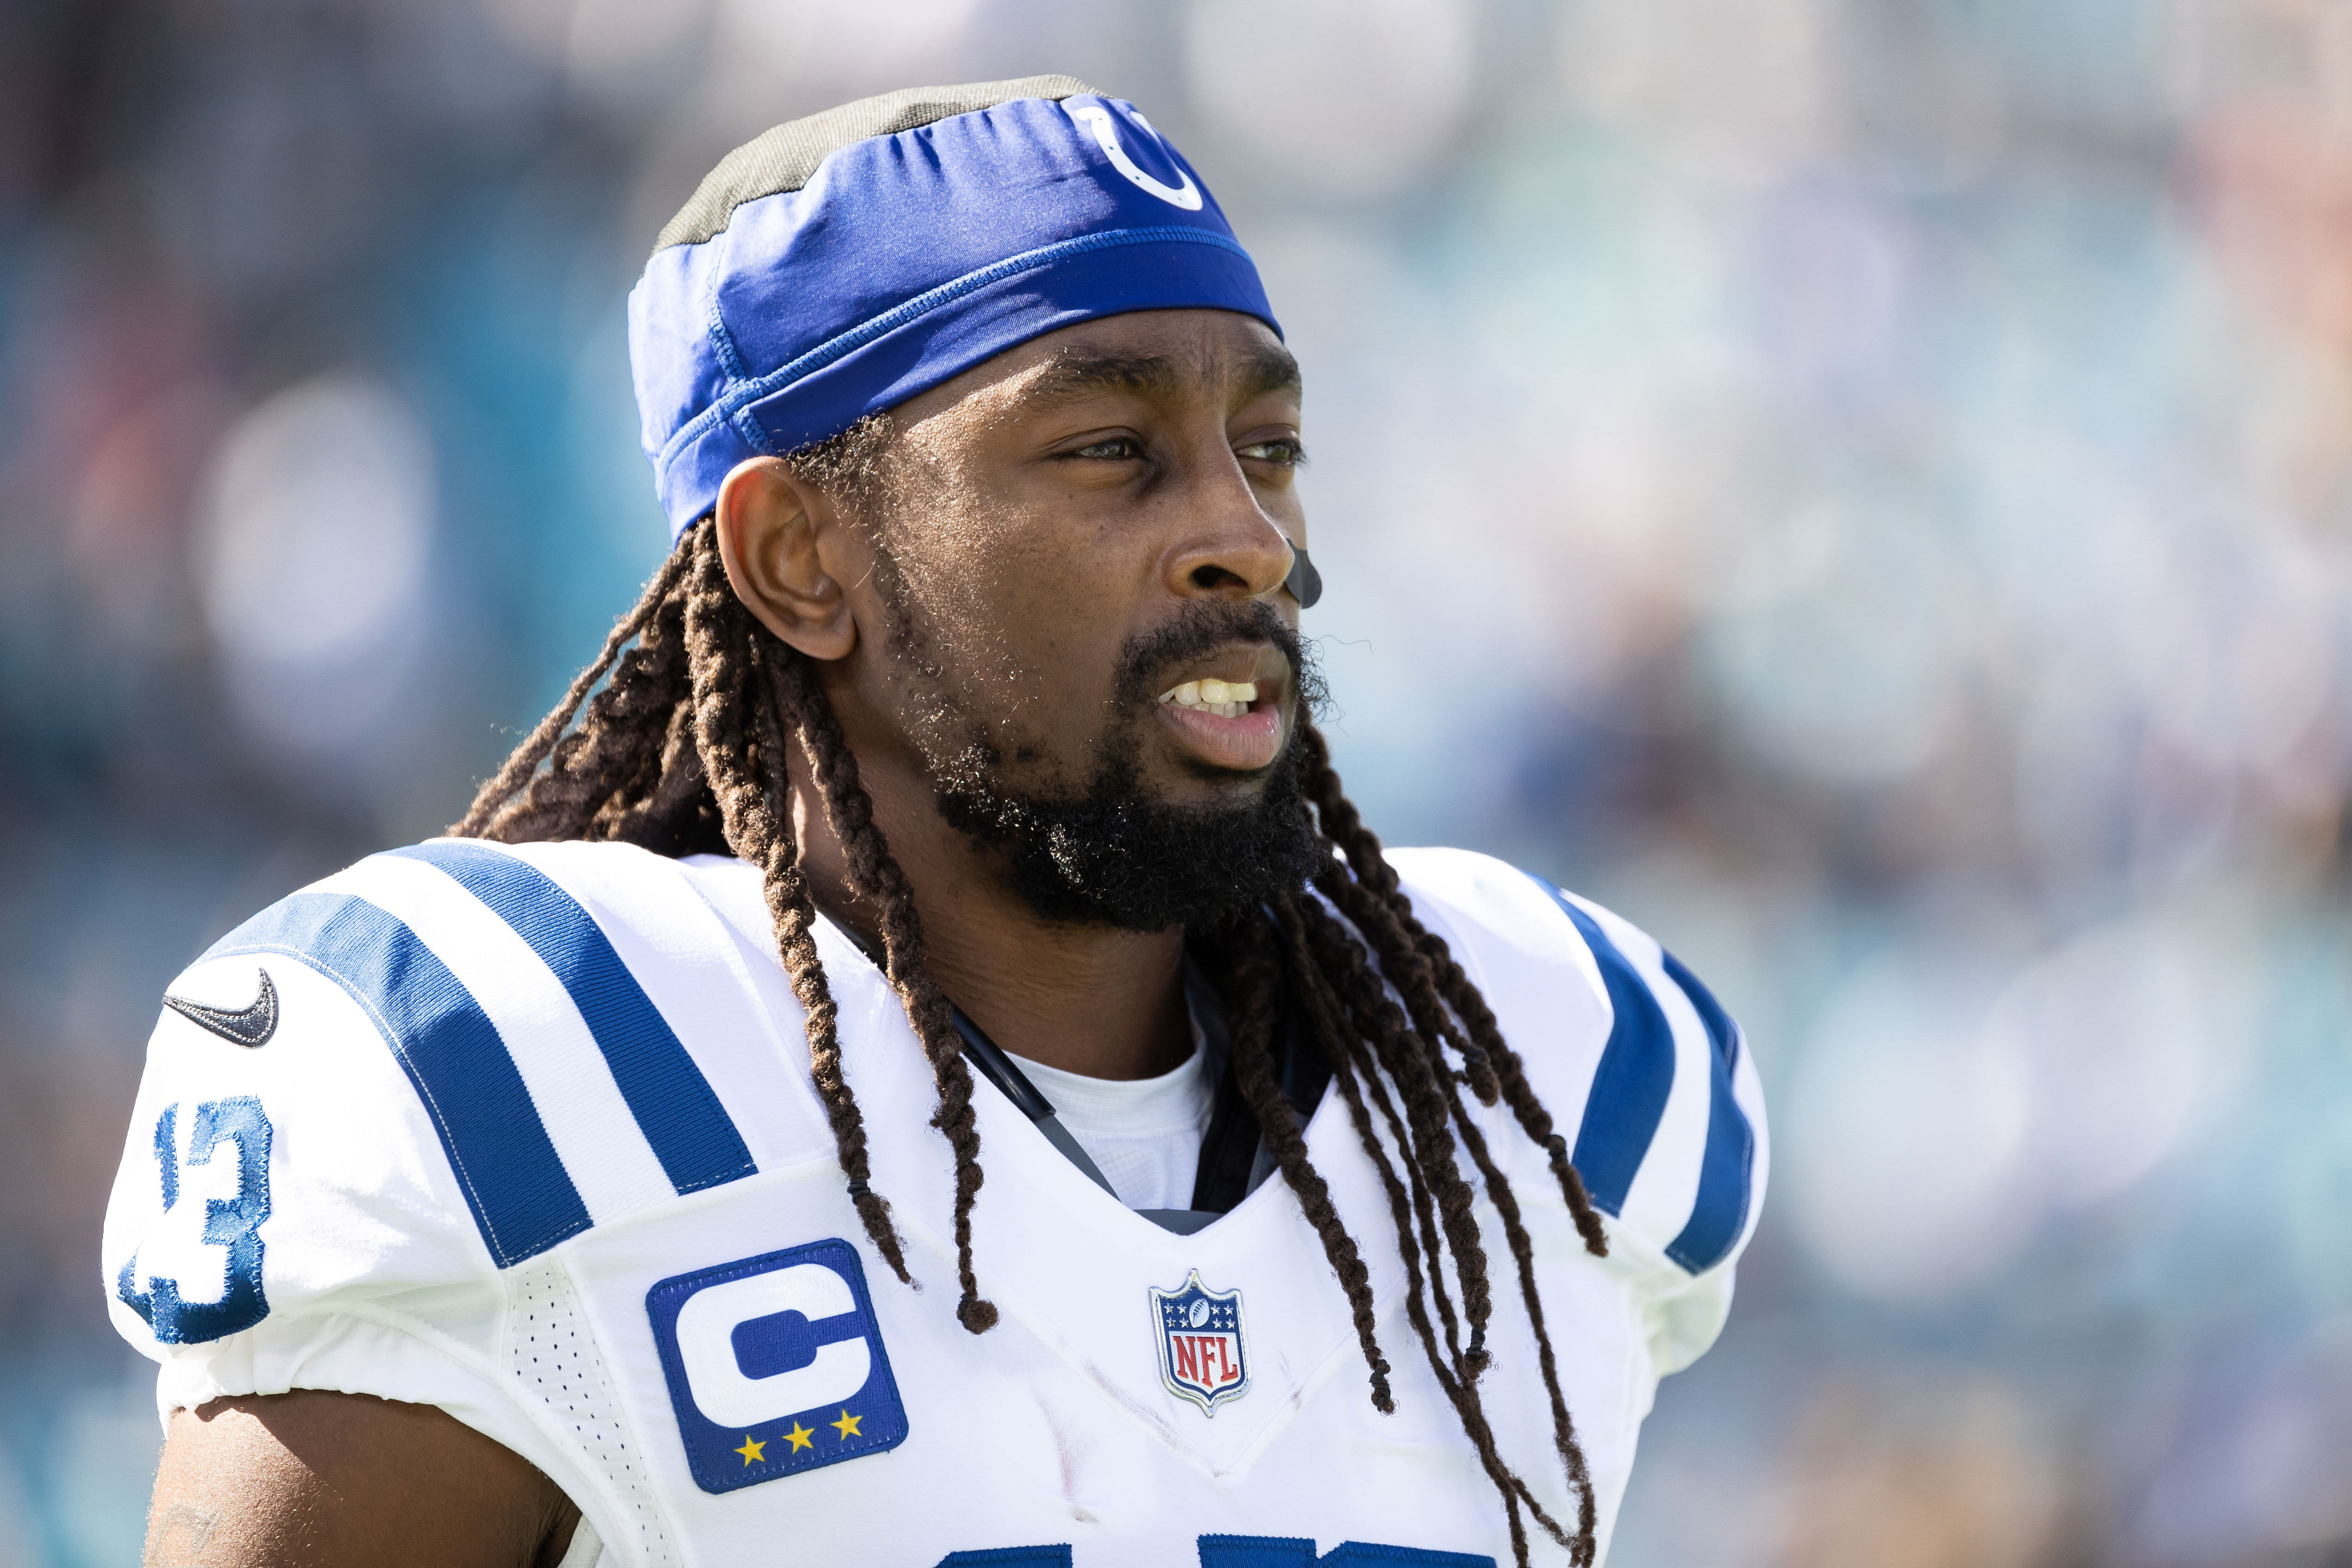 Former Indianapolis Colts wide receiver T.Y. Hilton